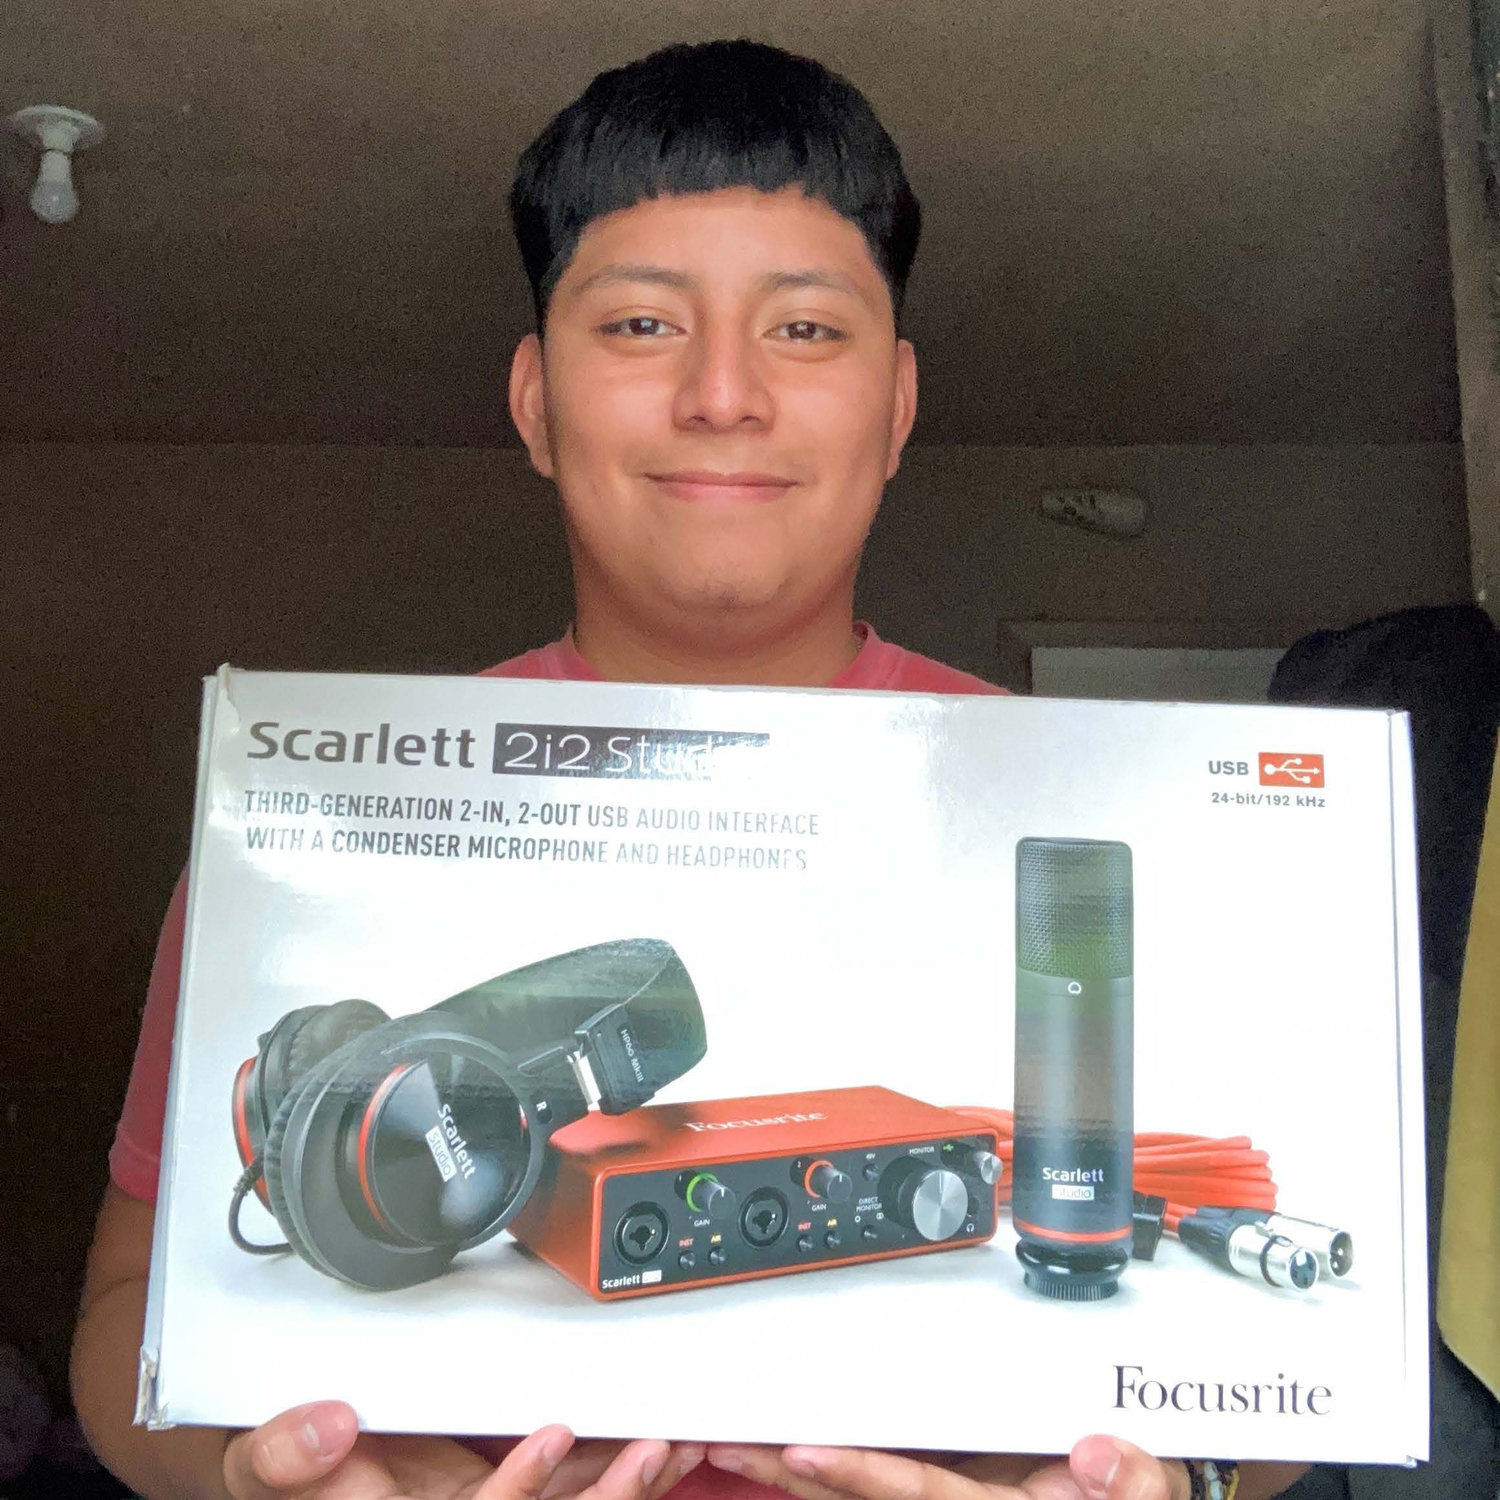 Elvis Velasquez used the funds to help purchase equipment to support his dreams of becoming a music producer.